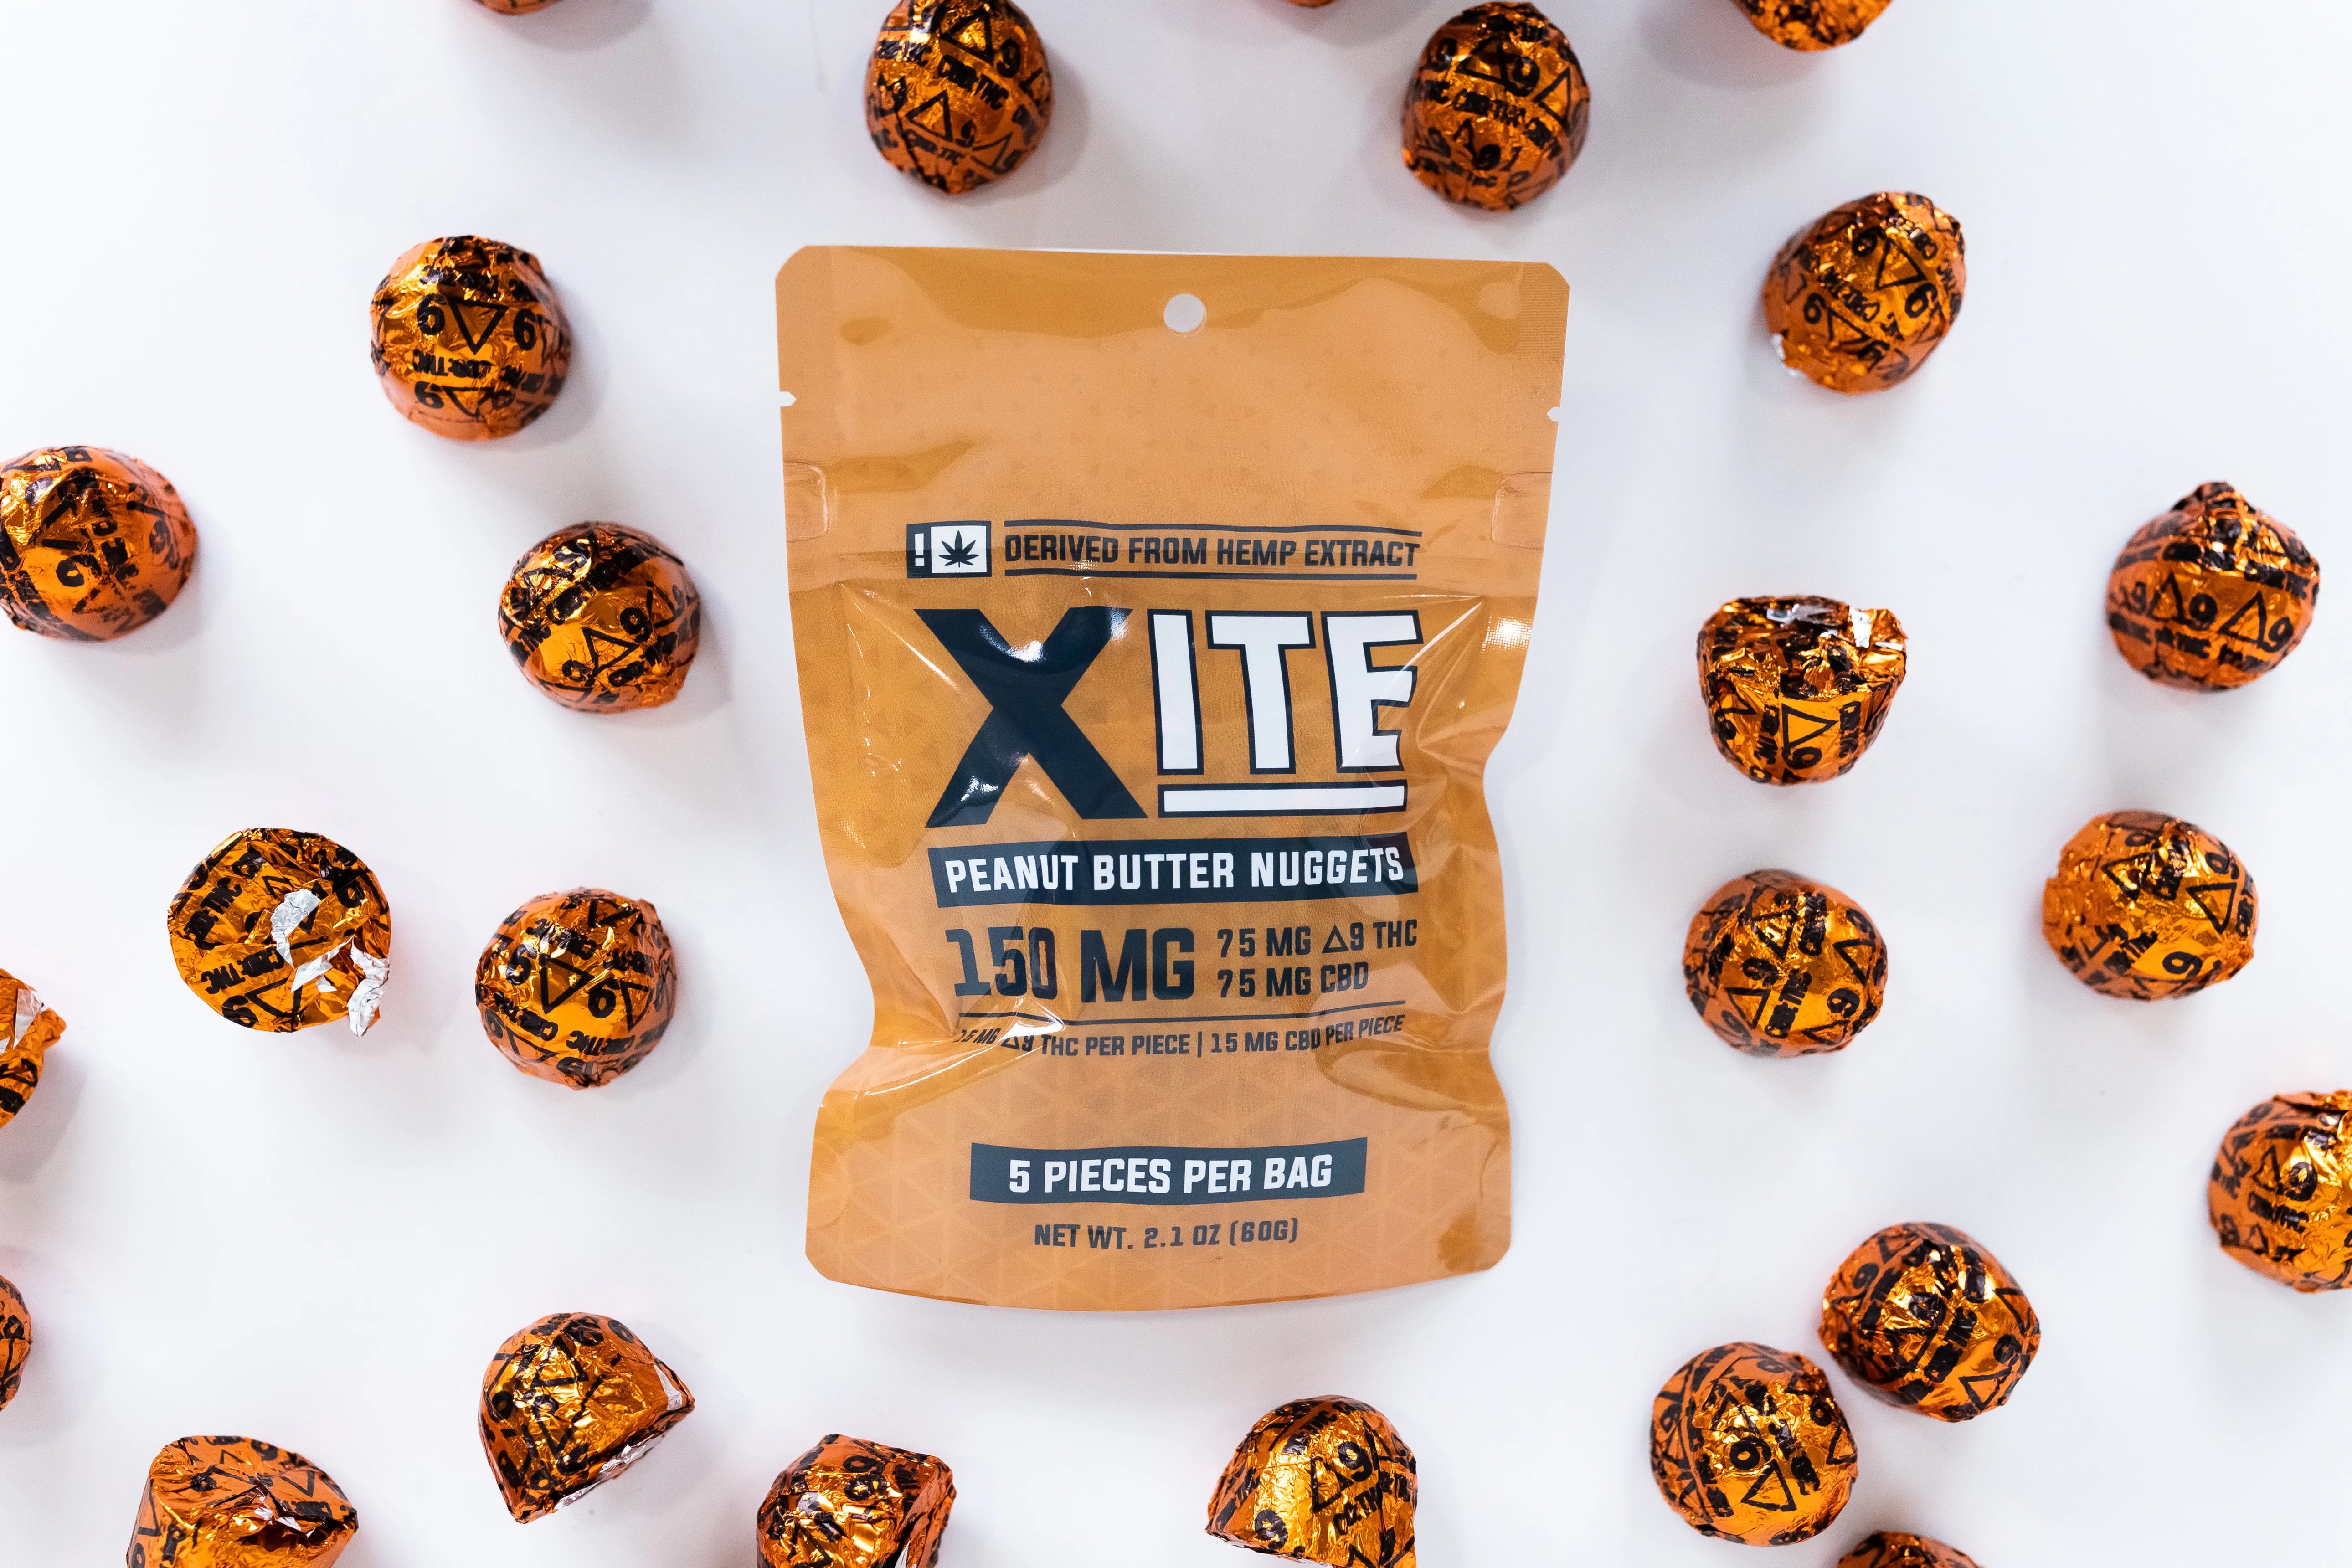 xite peanut butter nuggets thc and cbd 5 pack